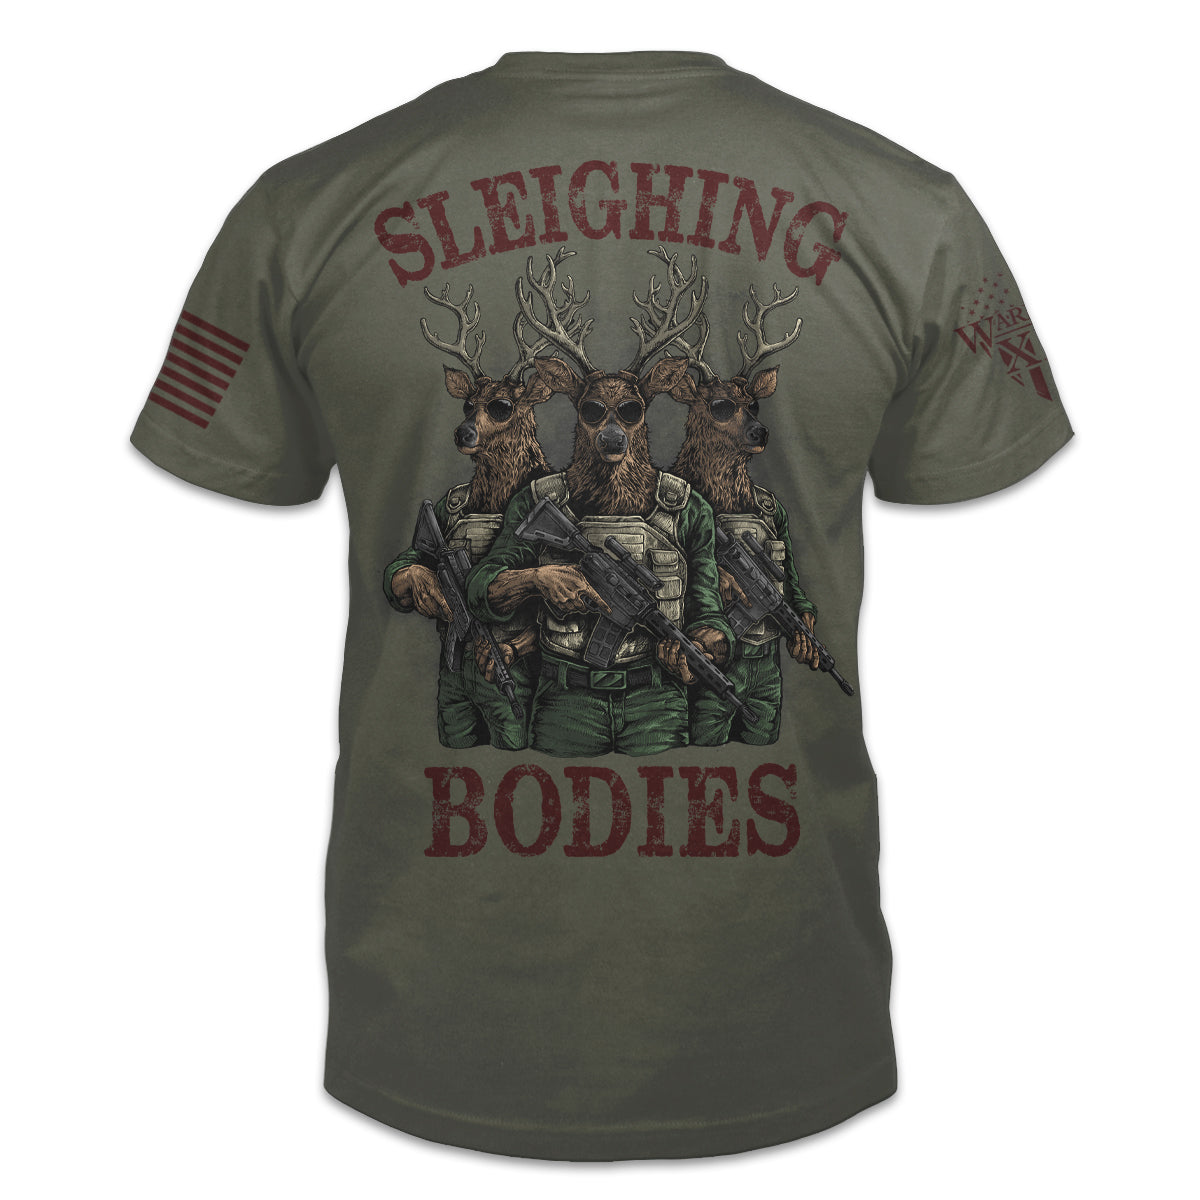 The reindeer games are over on Warrior 12's military green "Sleighing Bodies" t-shirt, this picture shows the back design only. The back shows 3 reindeers holding AR-15's ready for battle, with the red text Sleighing Bodies.